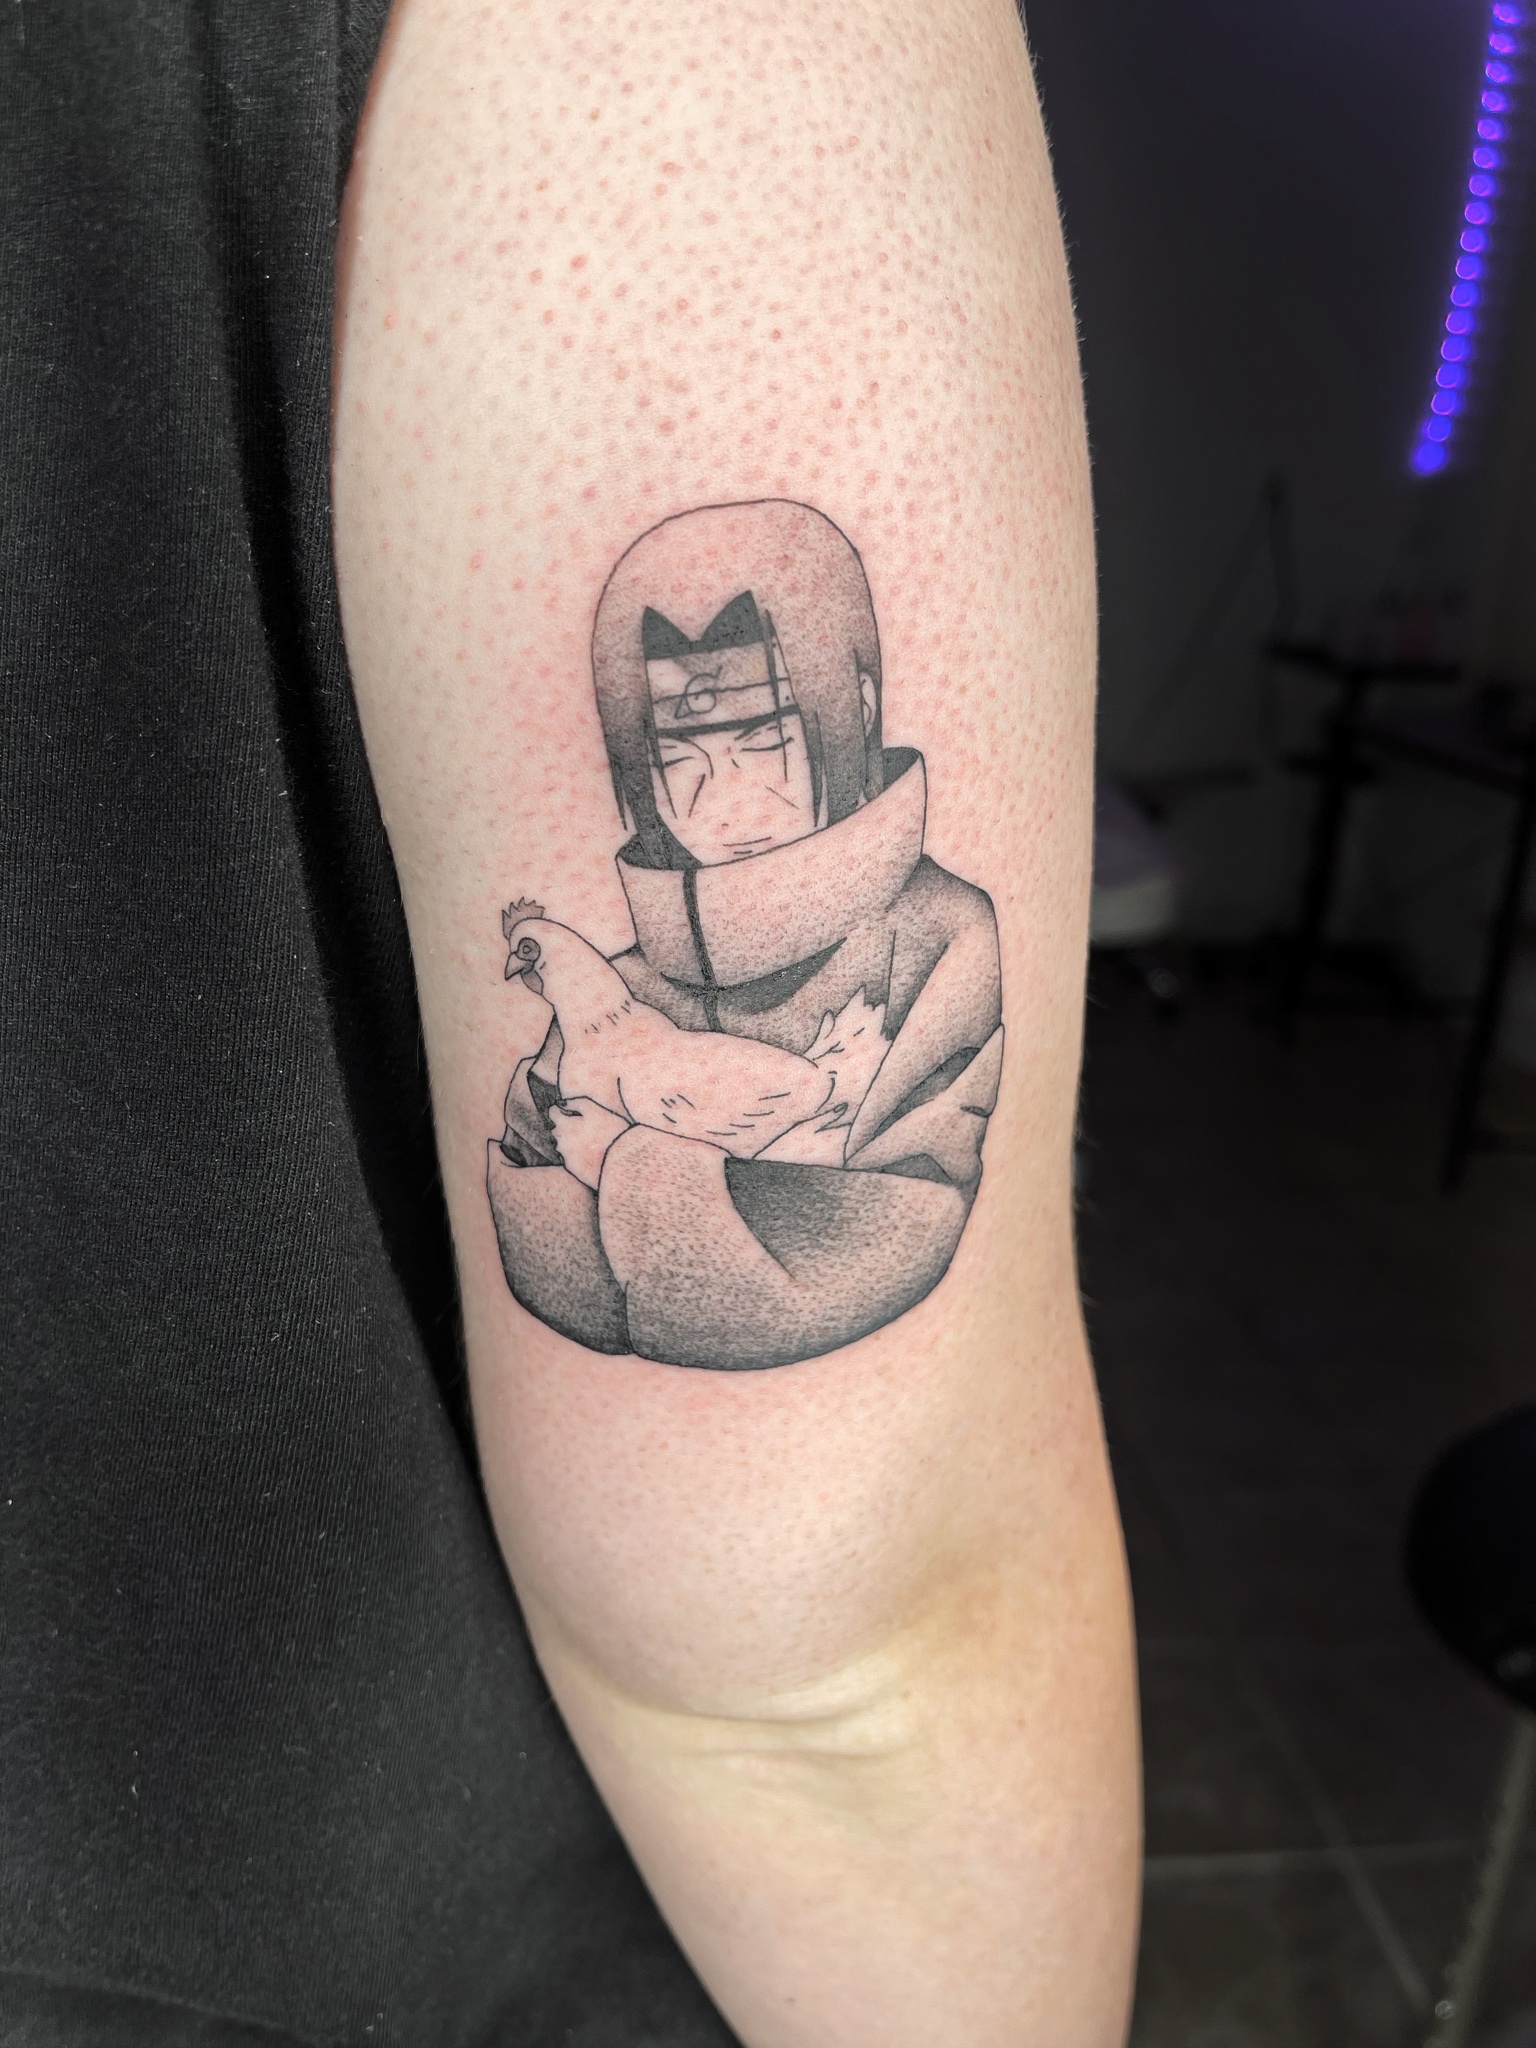 Got my first tattoo start with something small 3  rNaruto